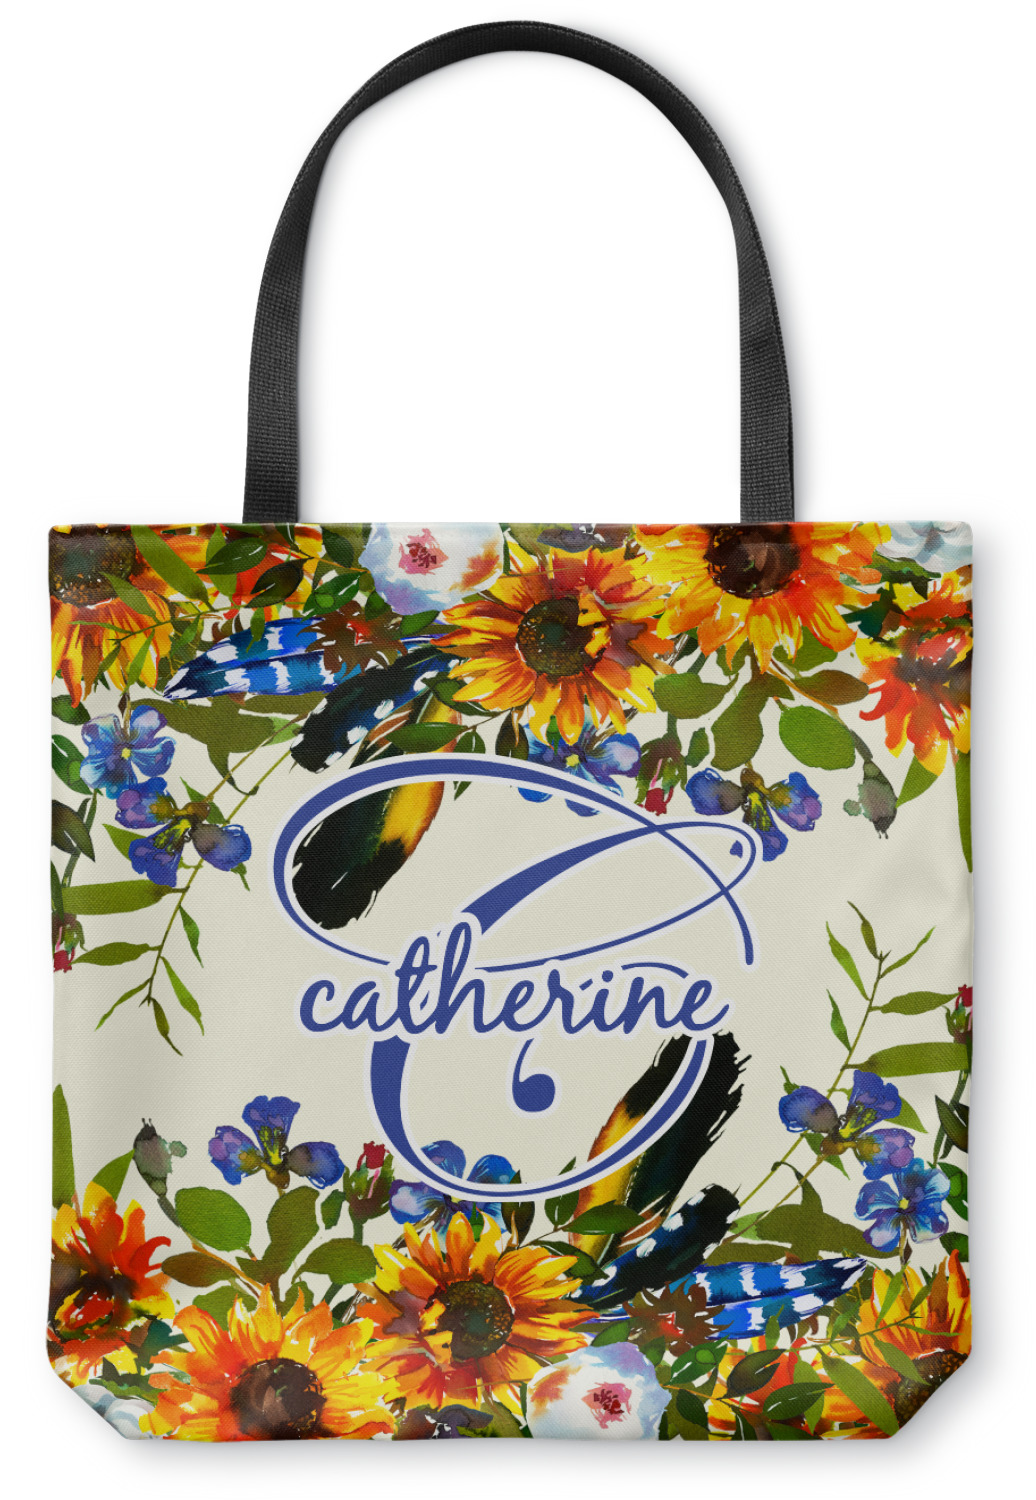 Custom Sunflowers Canvas Tote Bag (Personalized)